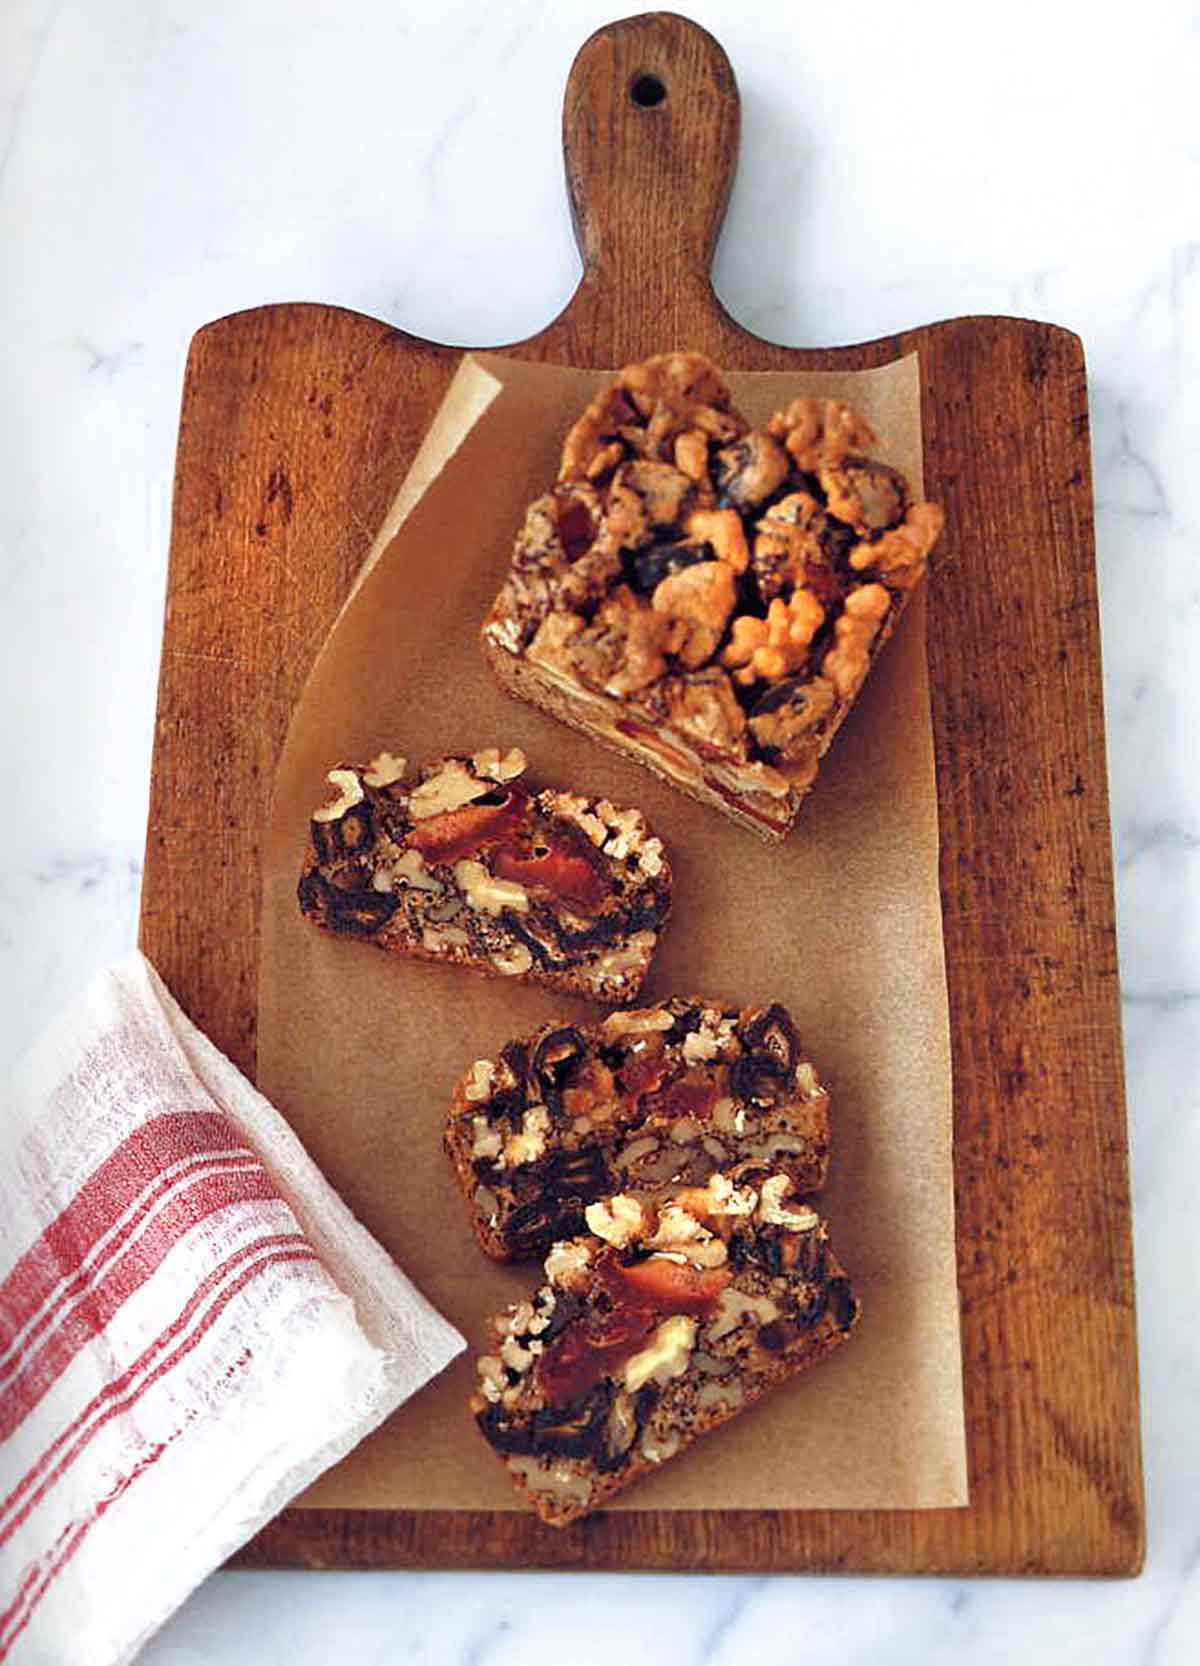 Dried fruit and nut cake in slices on a wooden cutting board with parchment paper, beside a red and white dish towel.